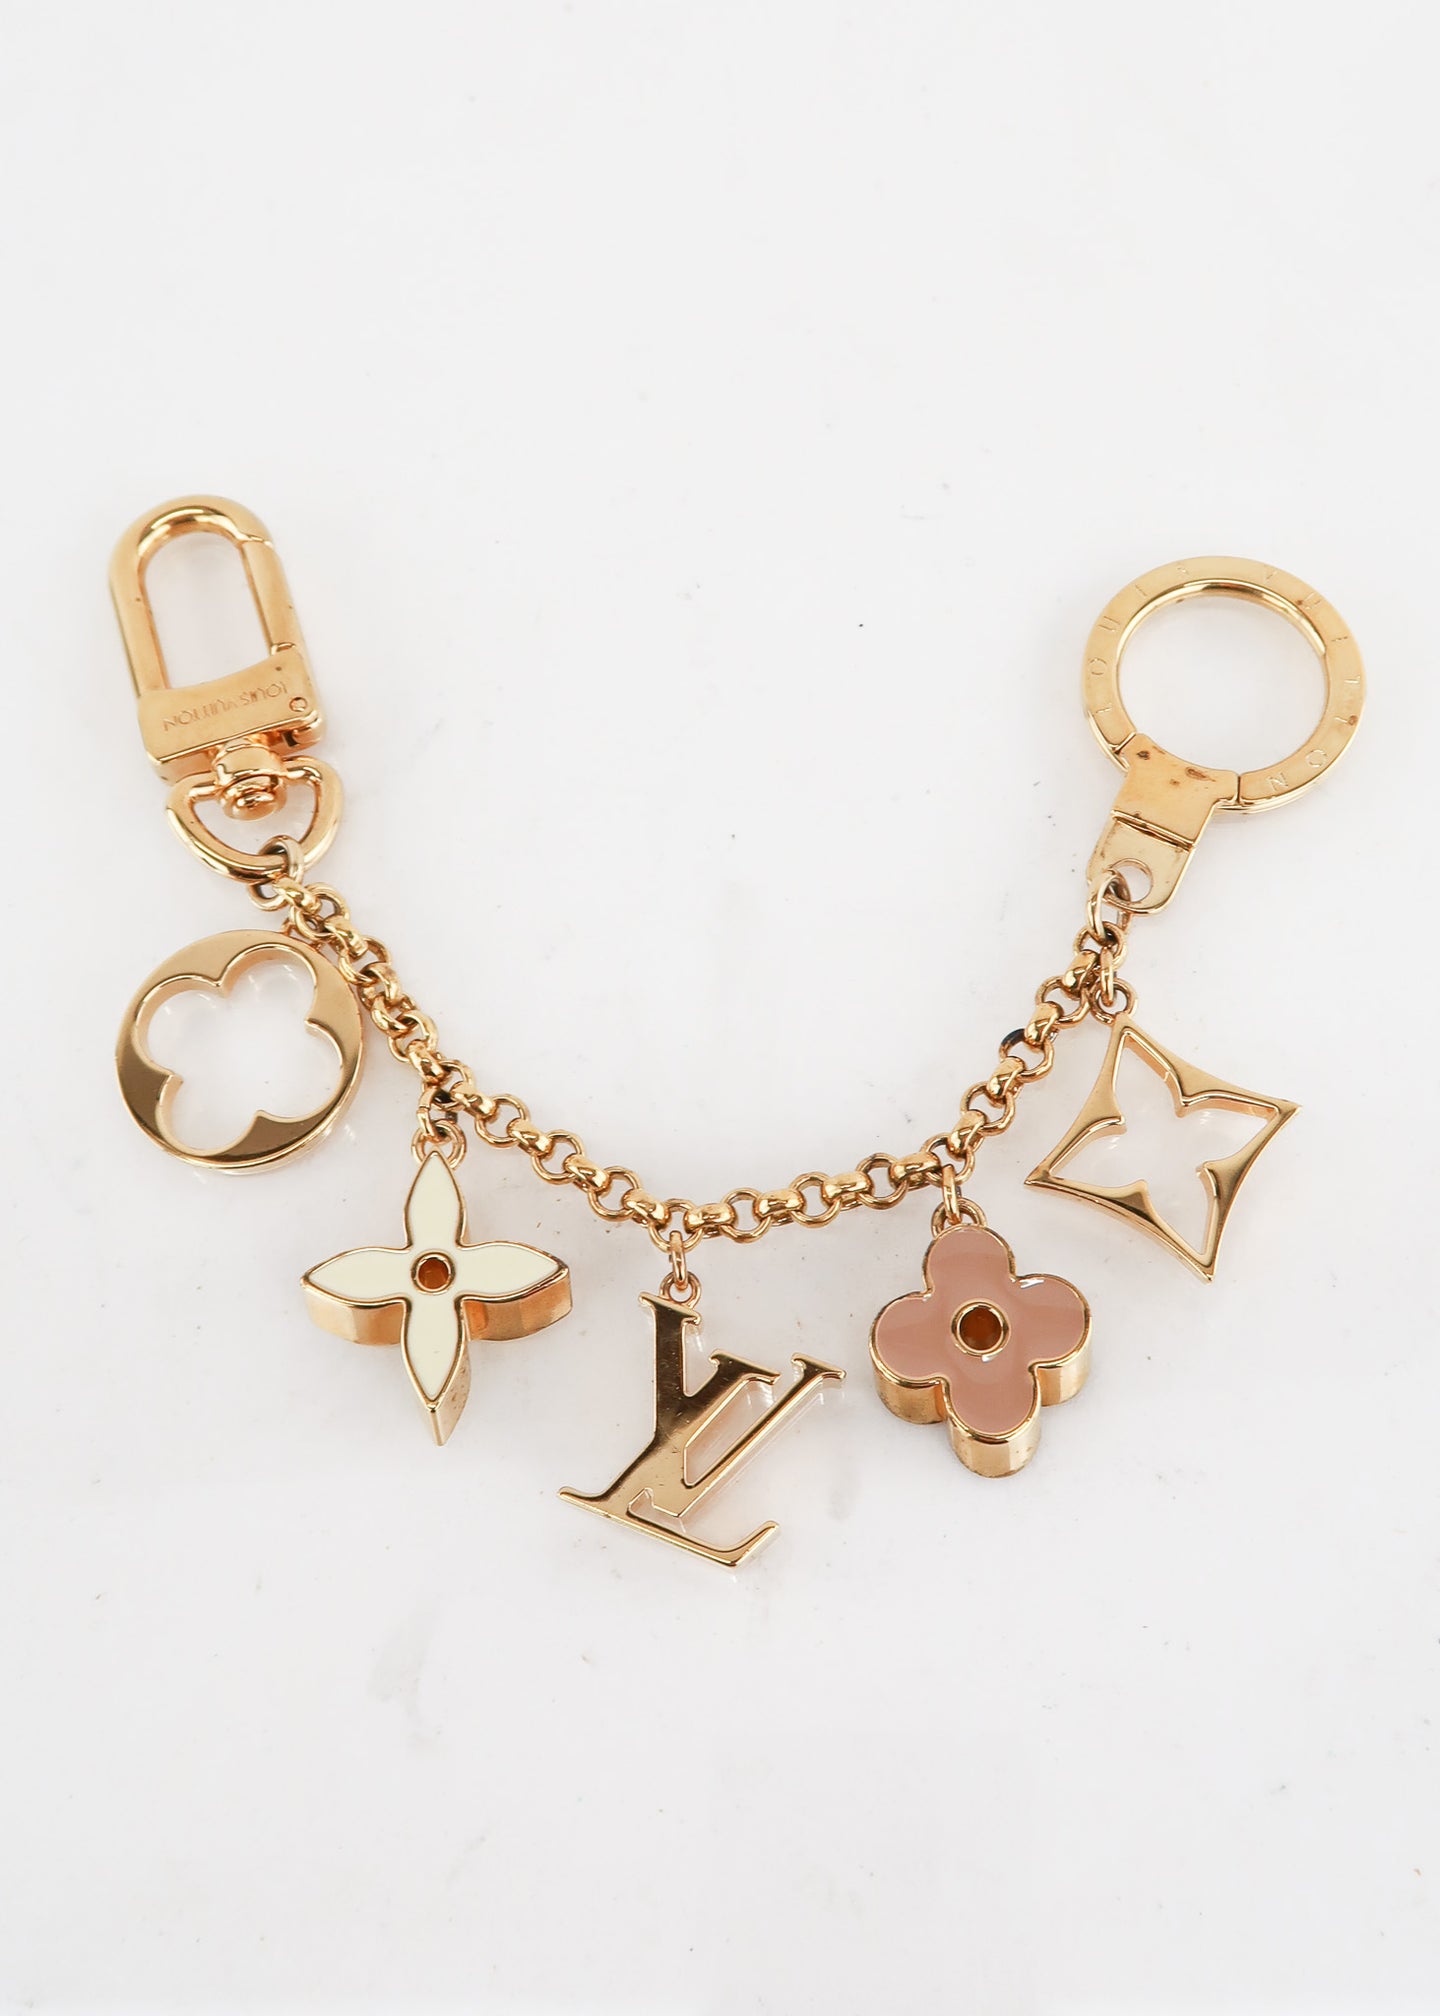 Pin by Katie Moyes on Rings  Louis vuitton, Boutique jewelry, Vuitton